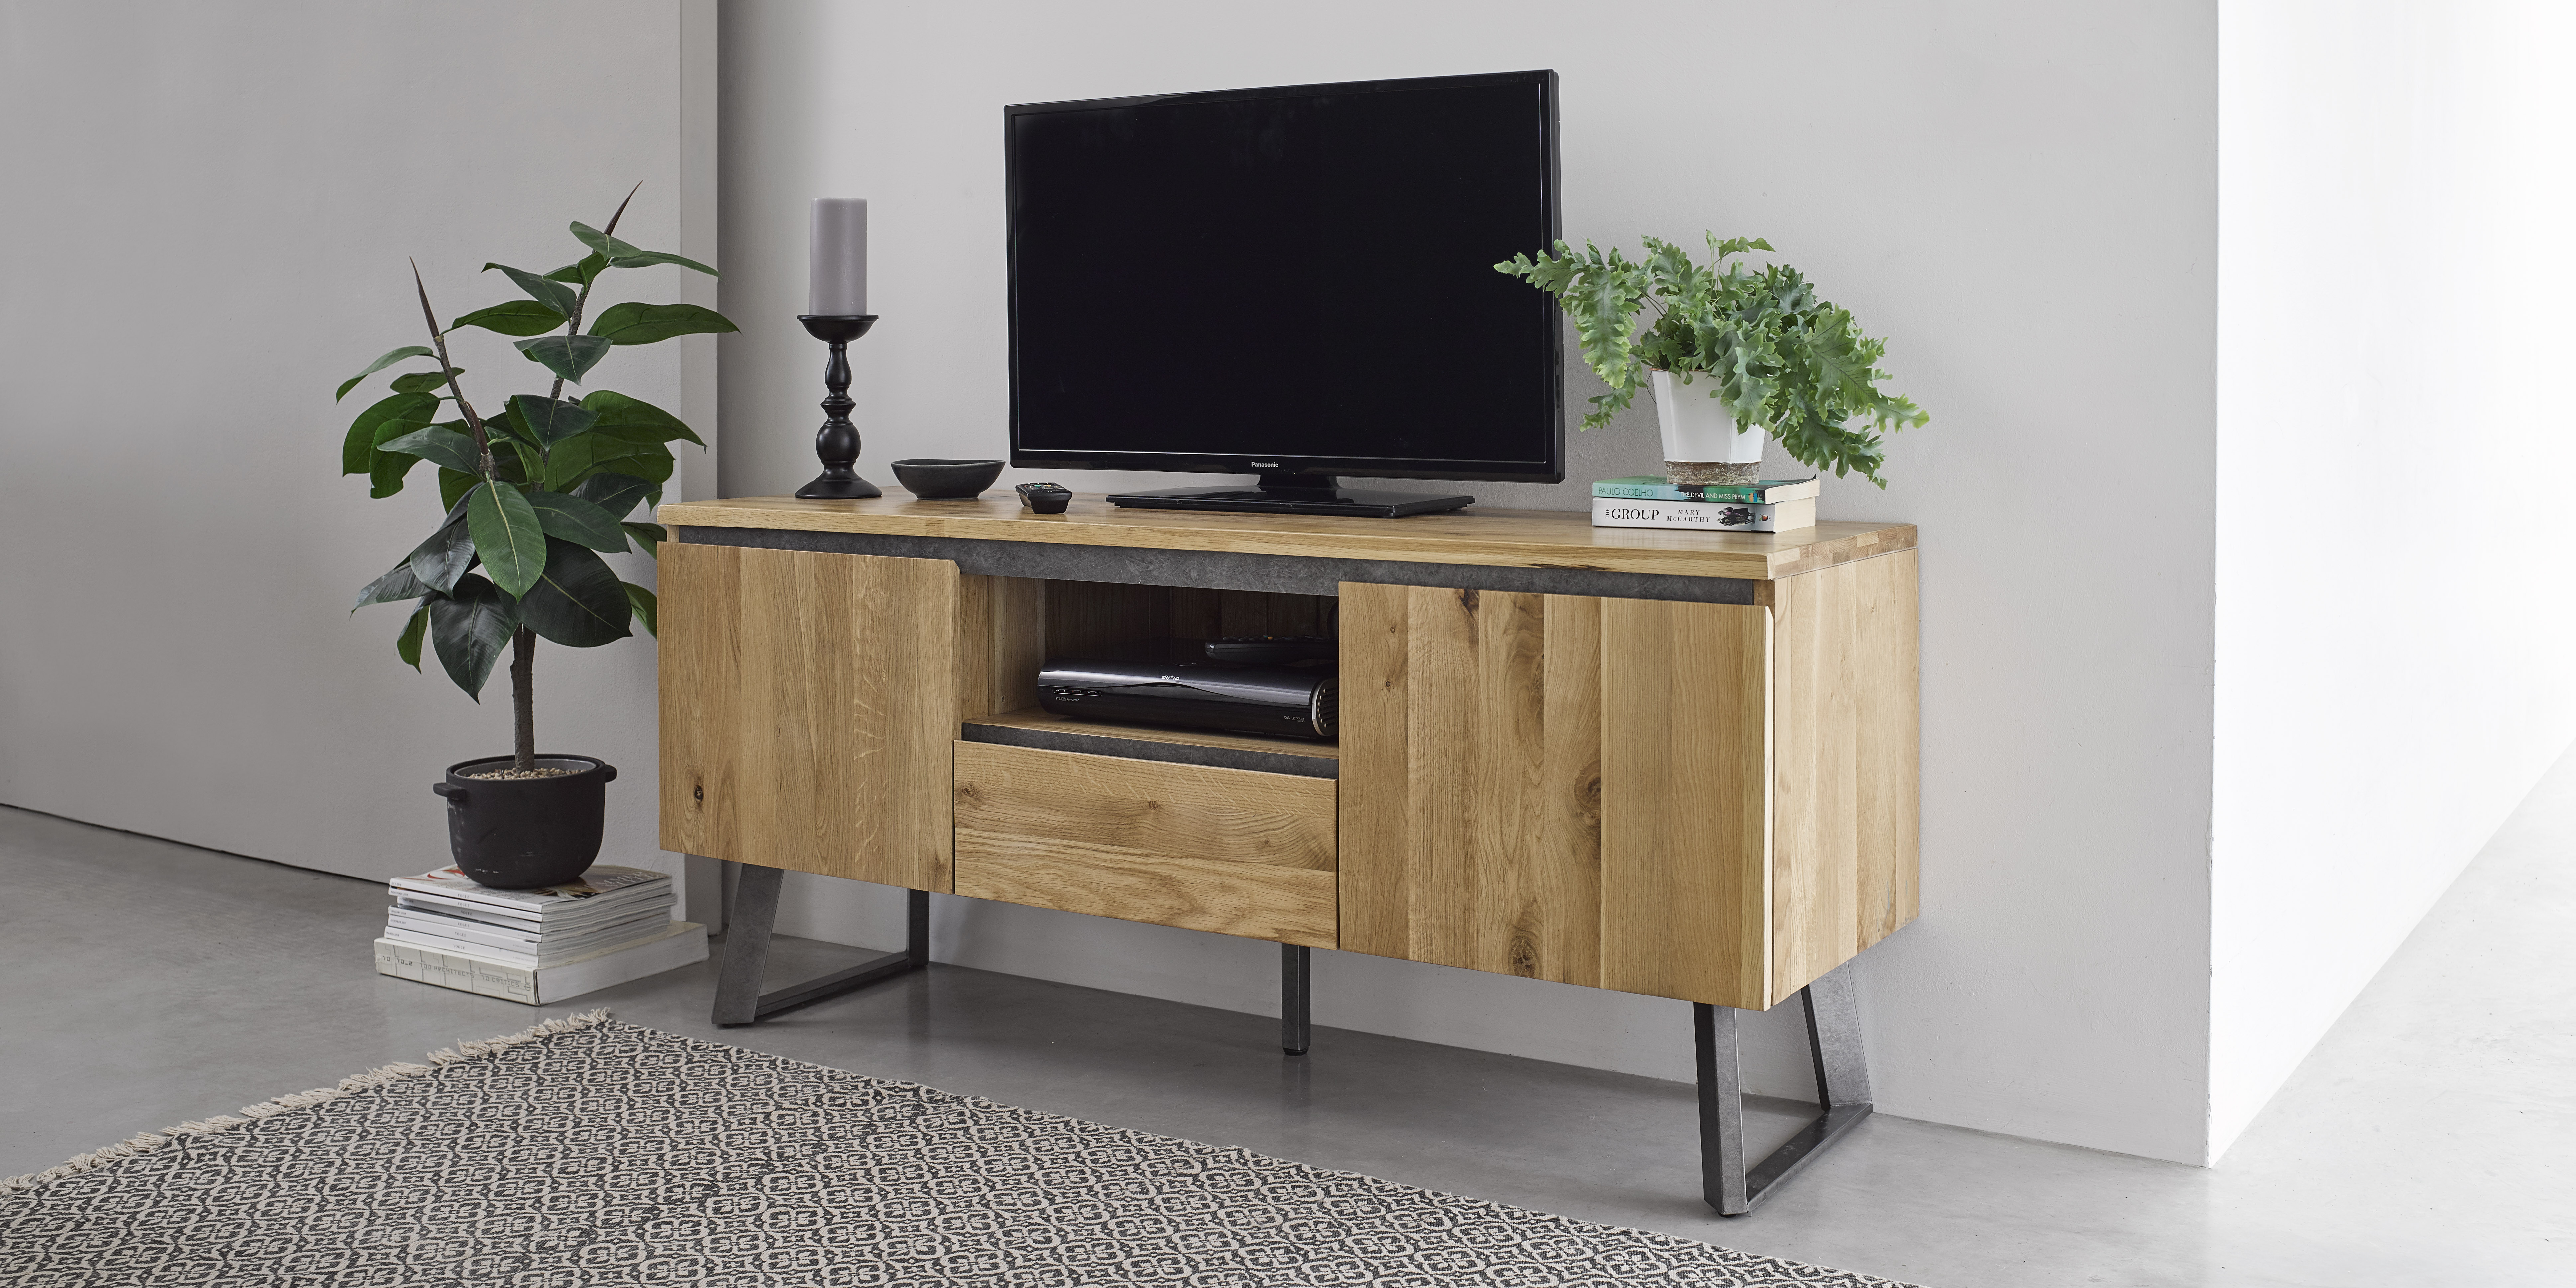 A light wood industrial style TV stand with a TV on in a light room with light grey walls and a light grey patterned rug. 